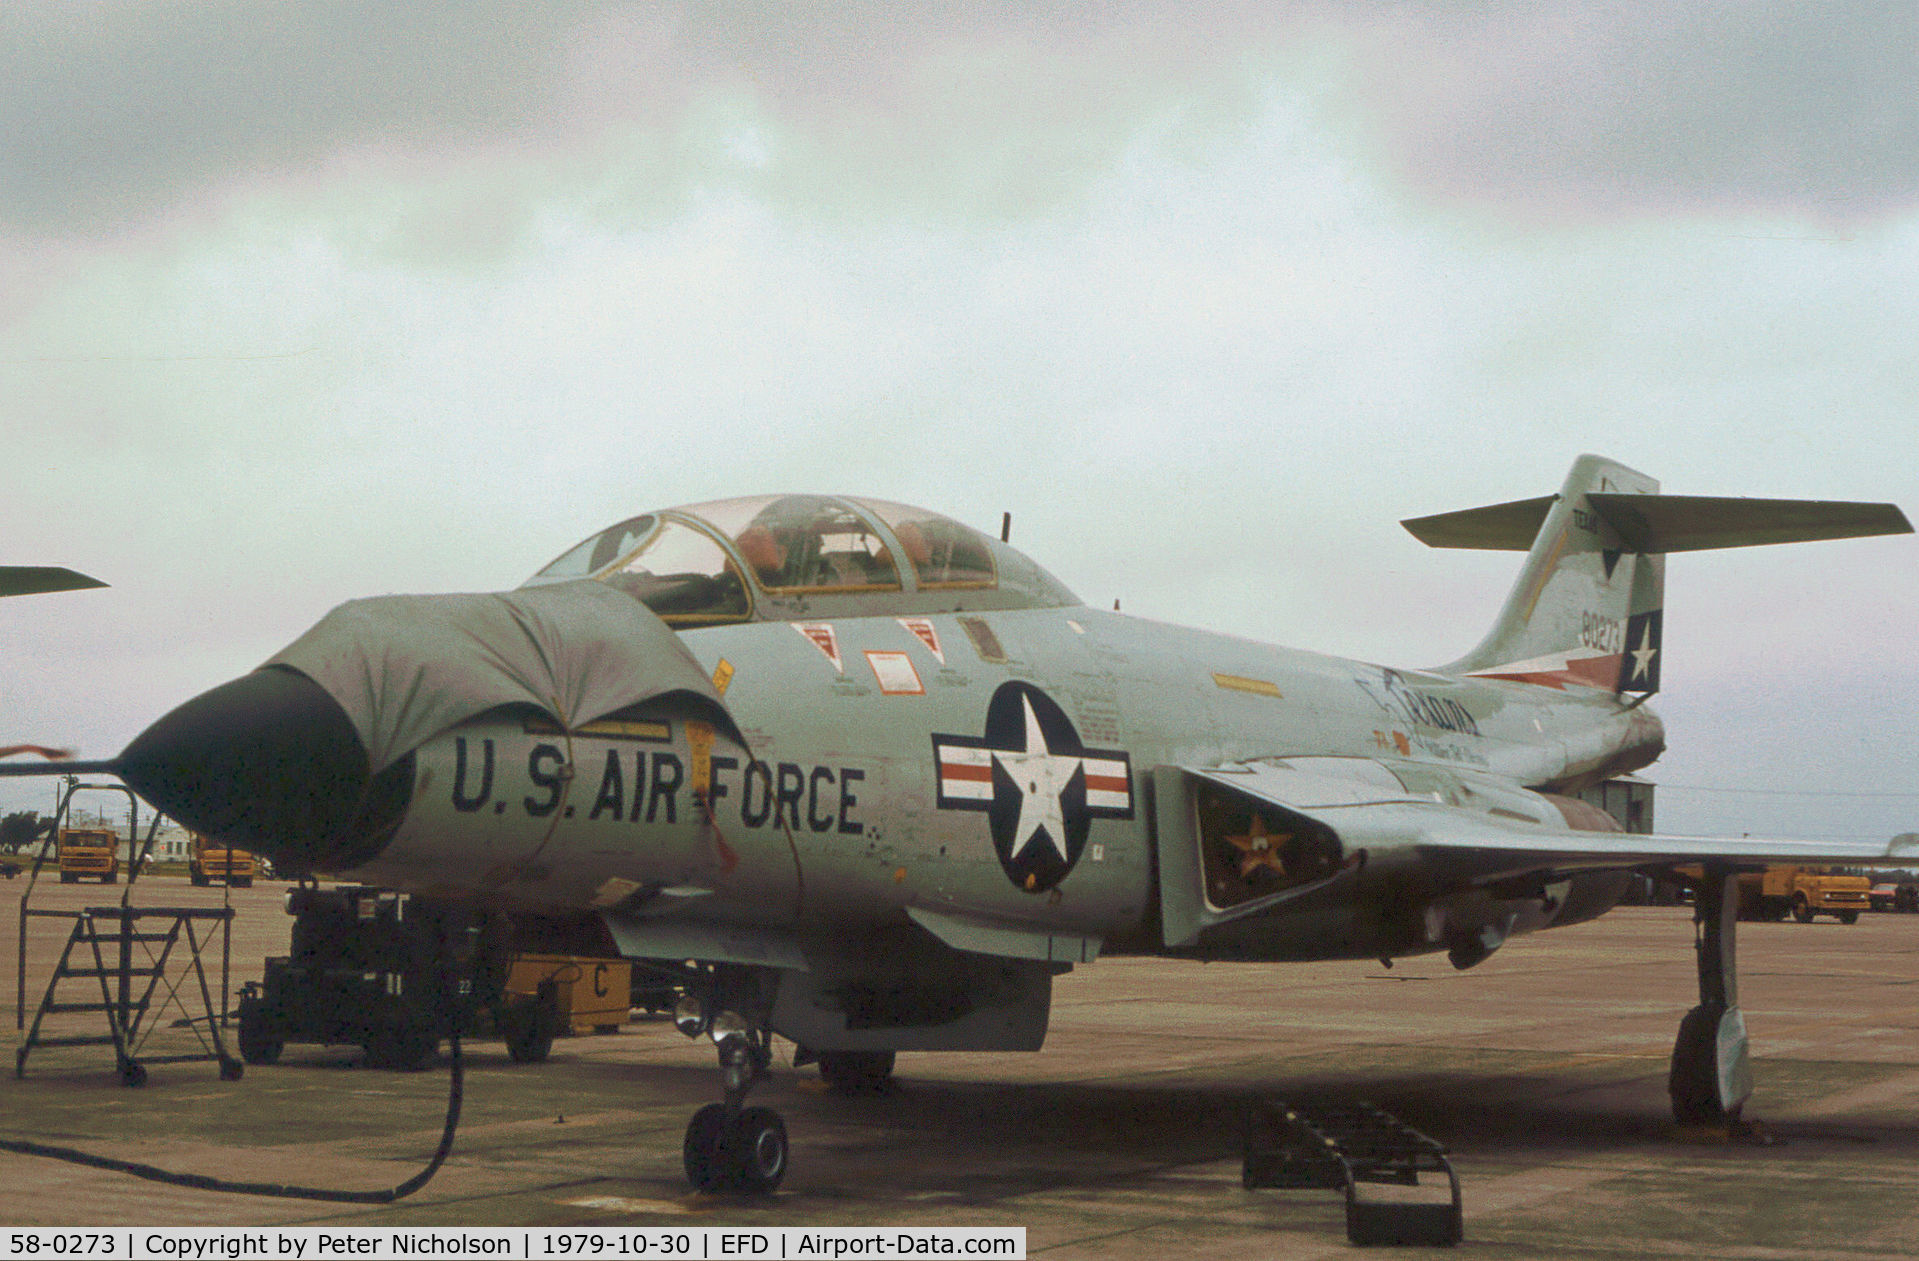 58-0273, 1958 McDonnell F-101B Voodoo C/N 645, F-101B Voodoo of the 111st Fighter Interceptor Squadron/147th Fighter Interceptor Group on the flight-line at Elllington AFB in October 1979.